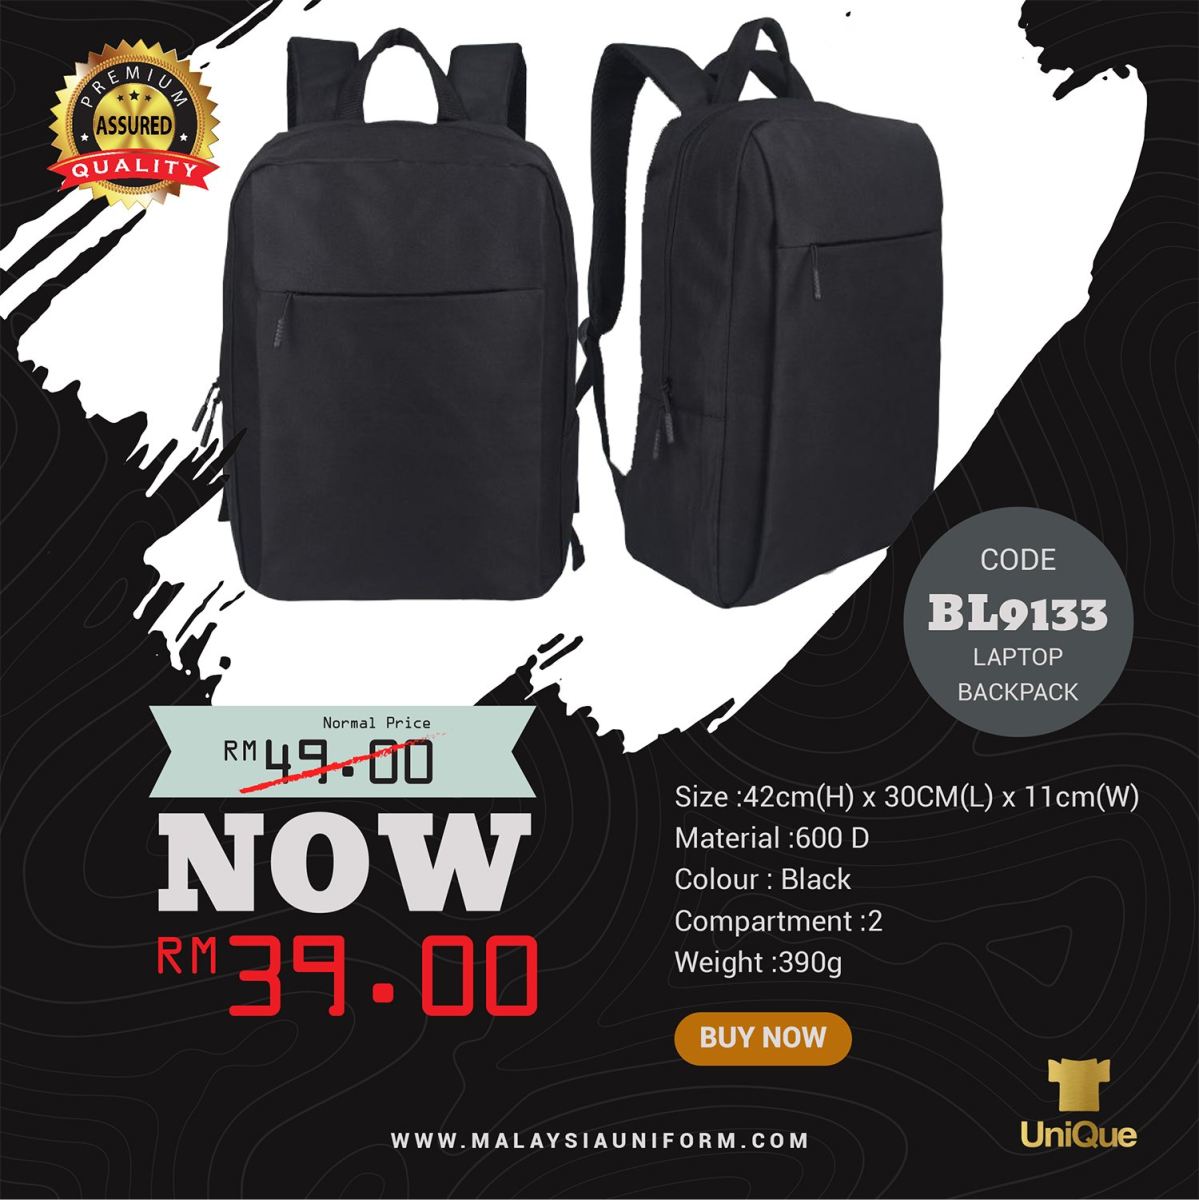 Our New Laptop Backpack Promotion